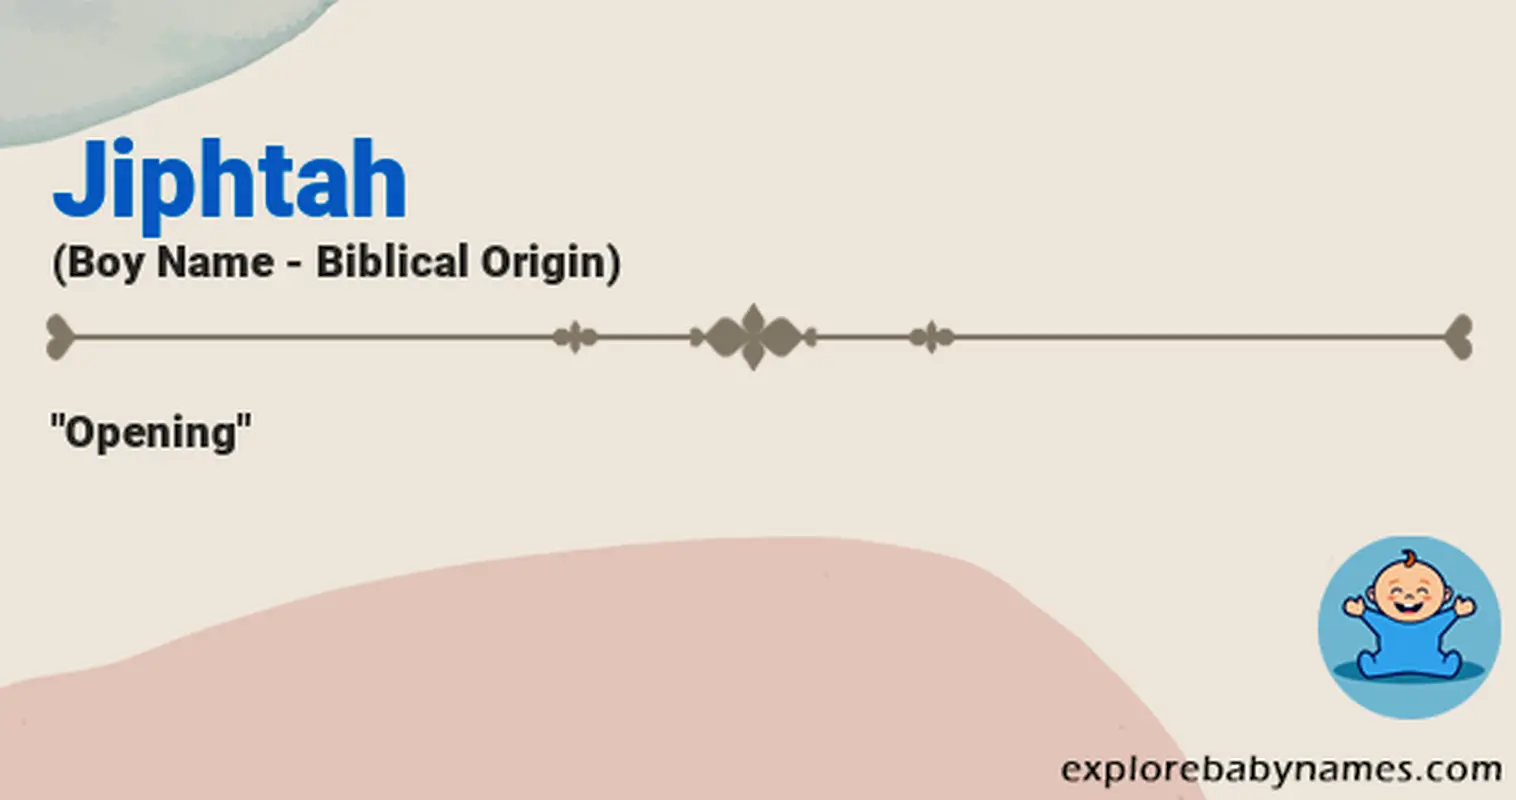 Meaning of Jiphtah